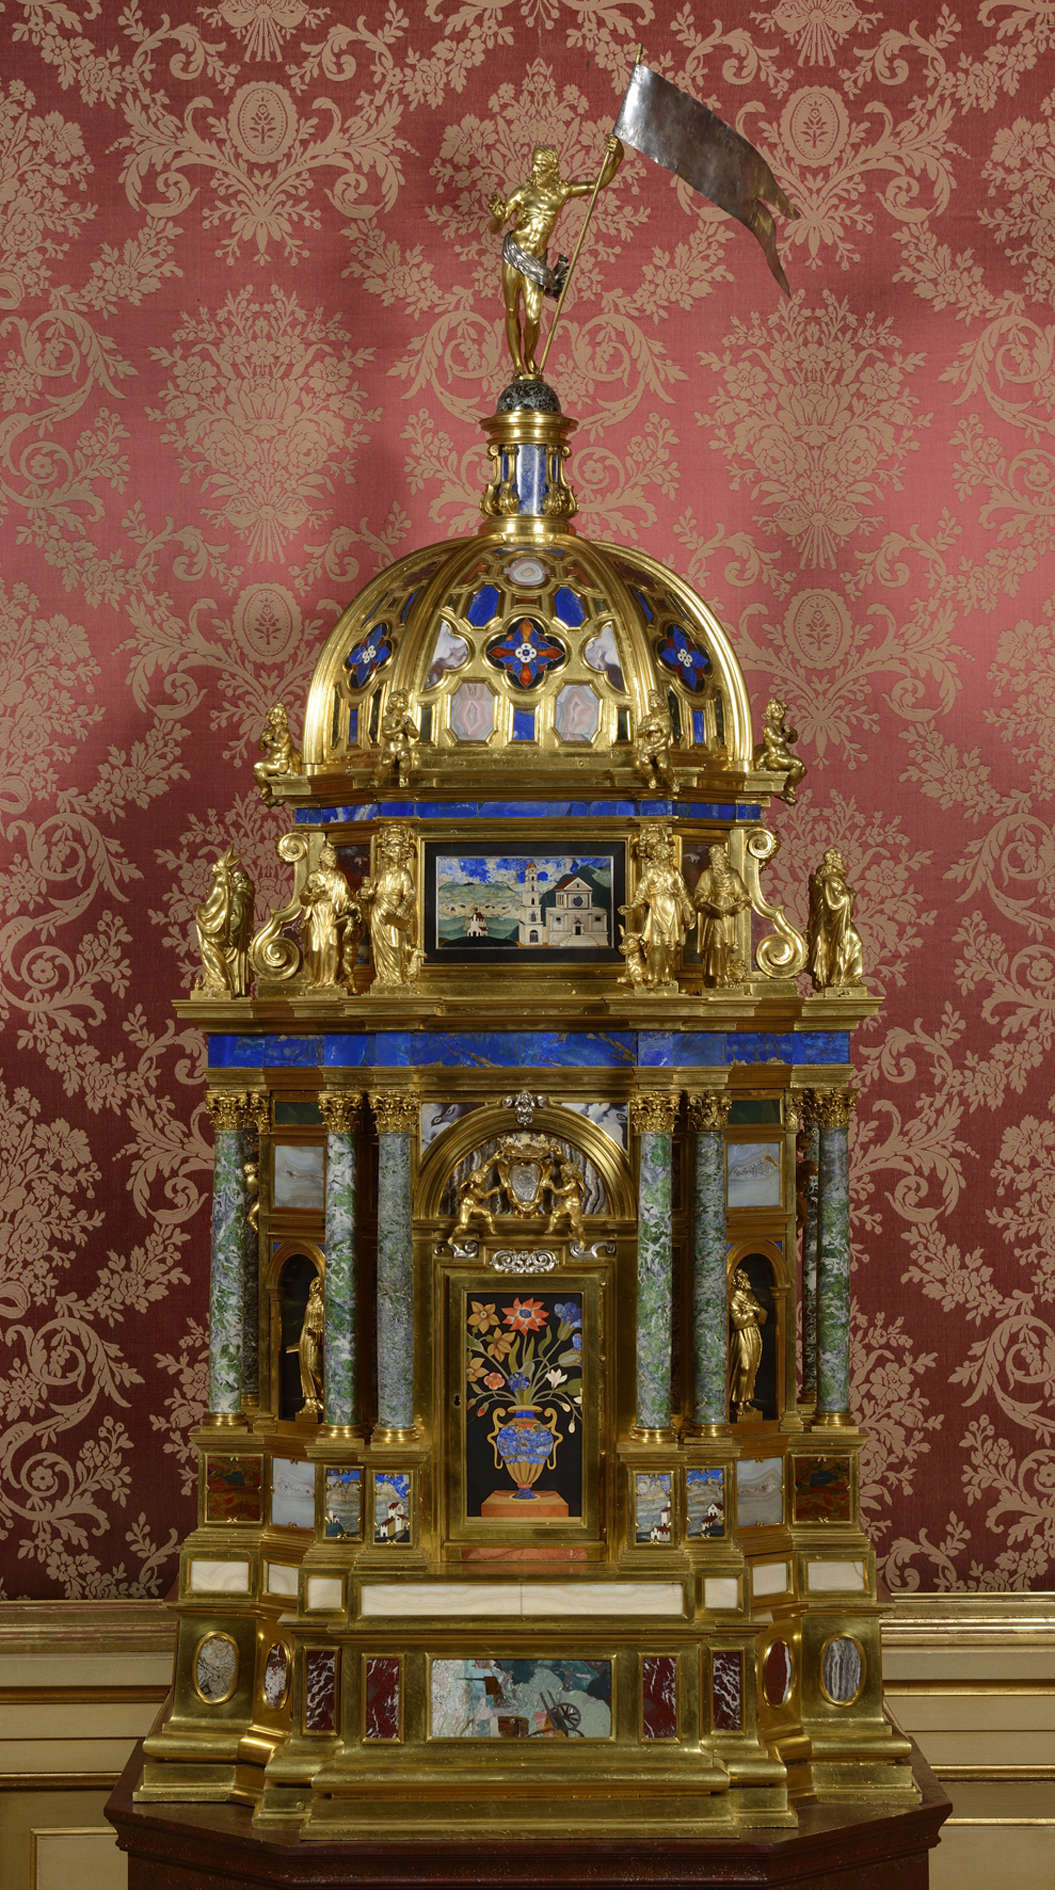 Domenico Montini, Tabernacle (1619; bronze, silver, and semiprecious stones, 503 x 245 cm; Madrid, Gallery of the Royal Collections)